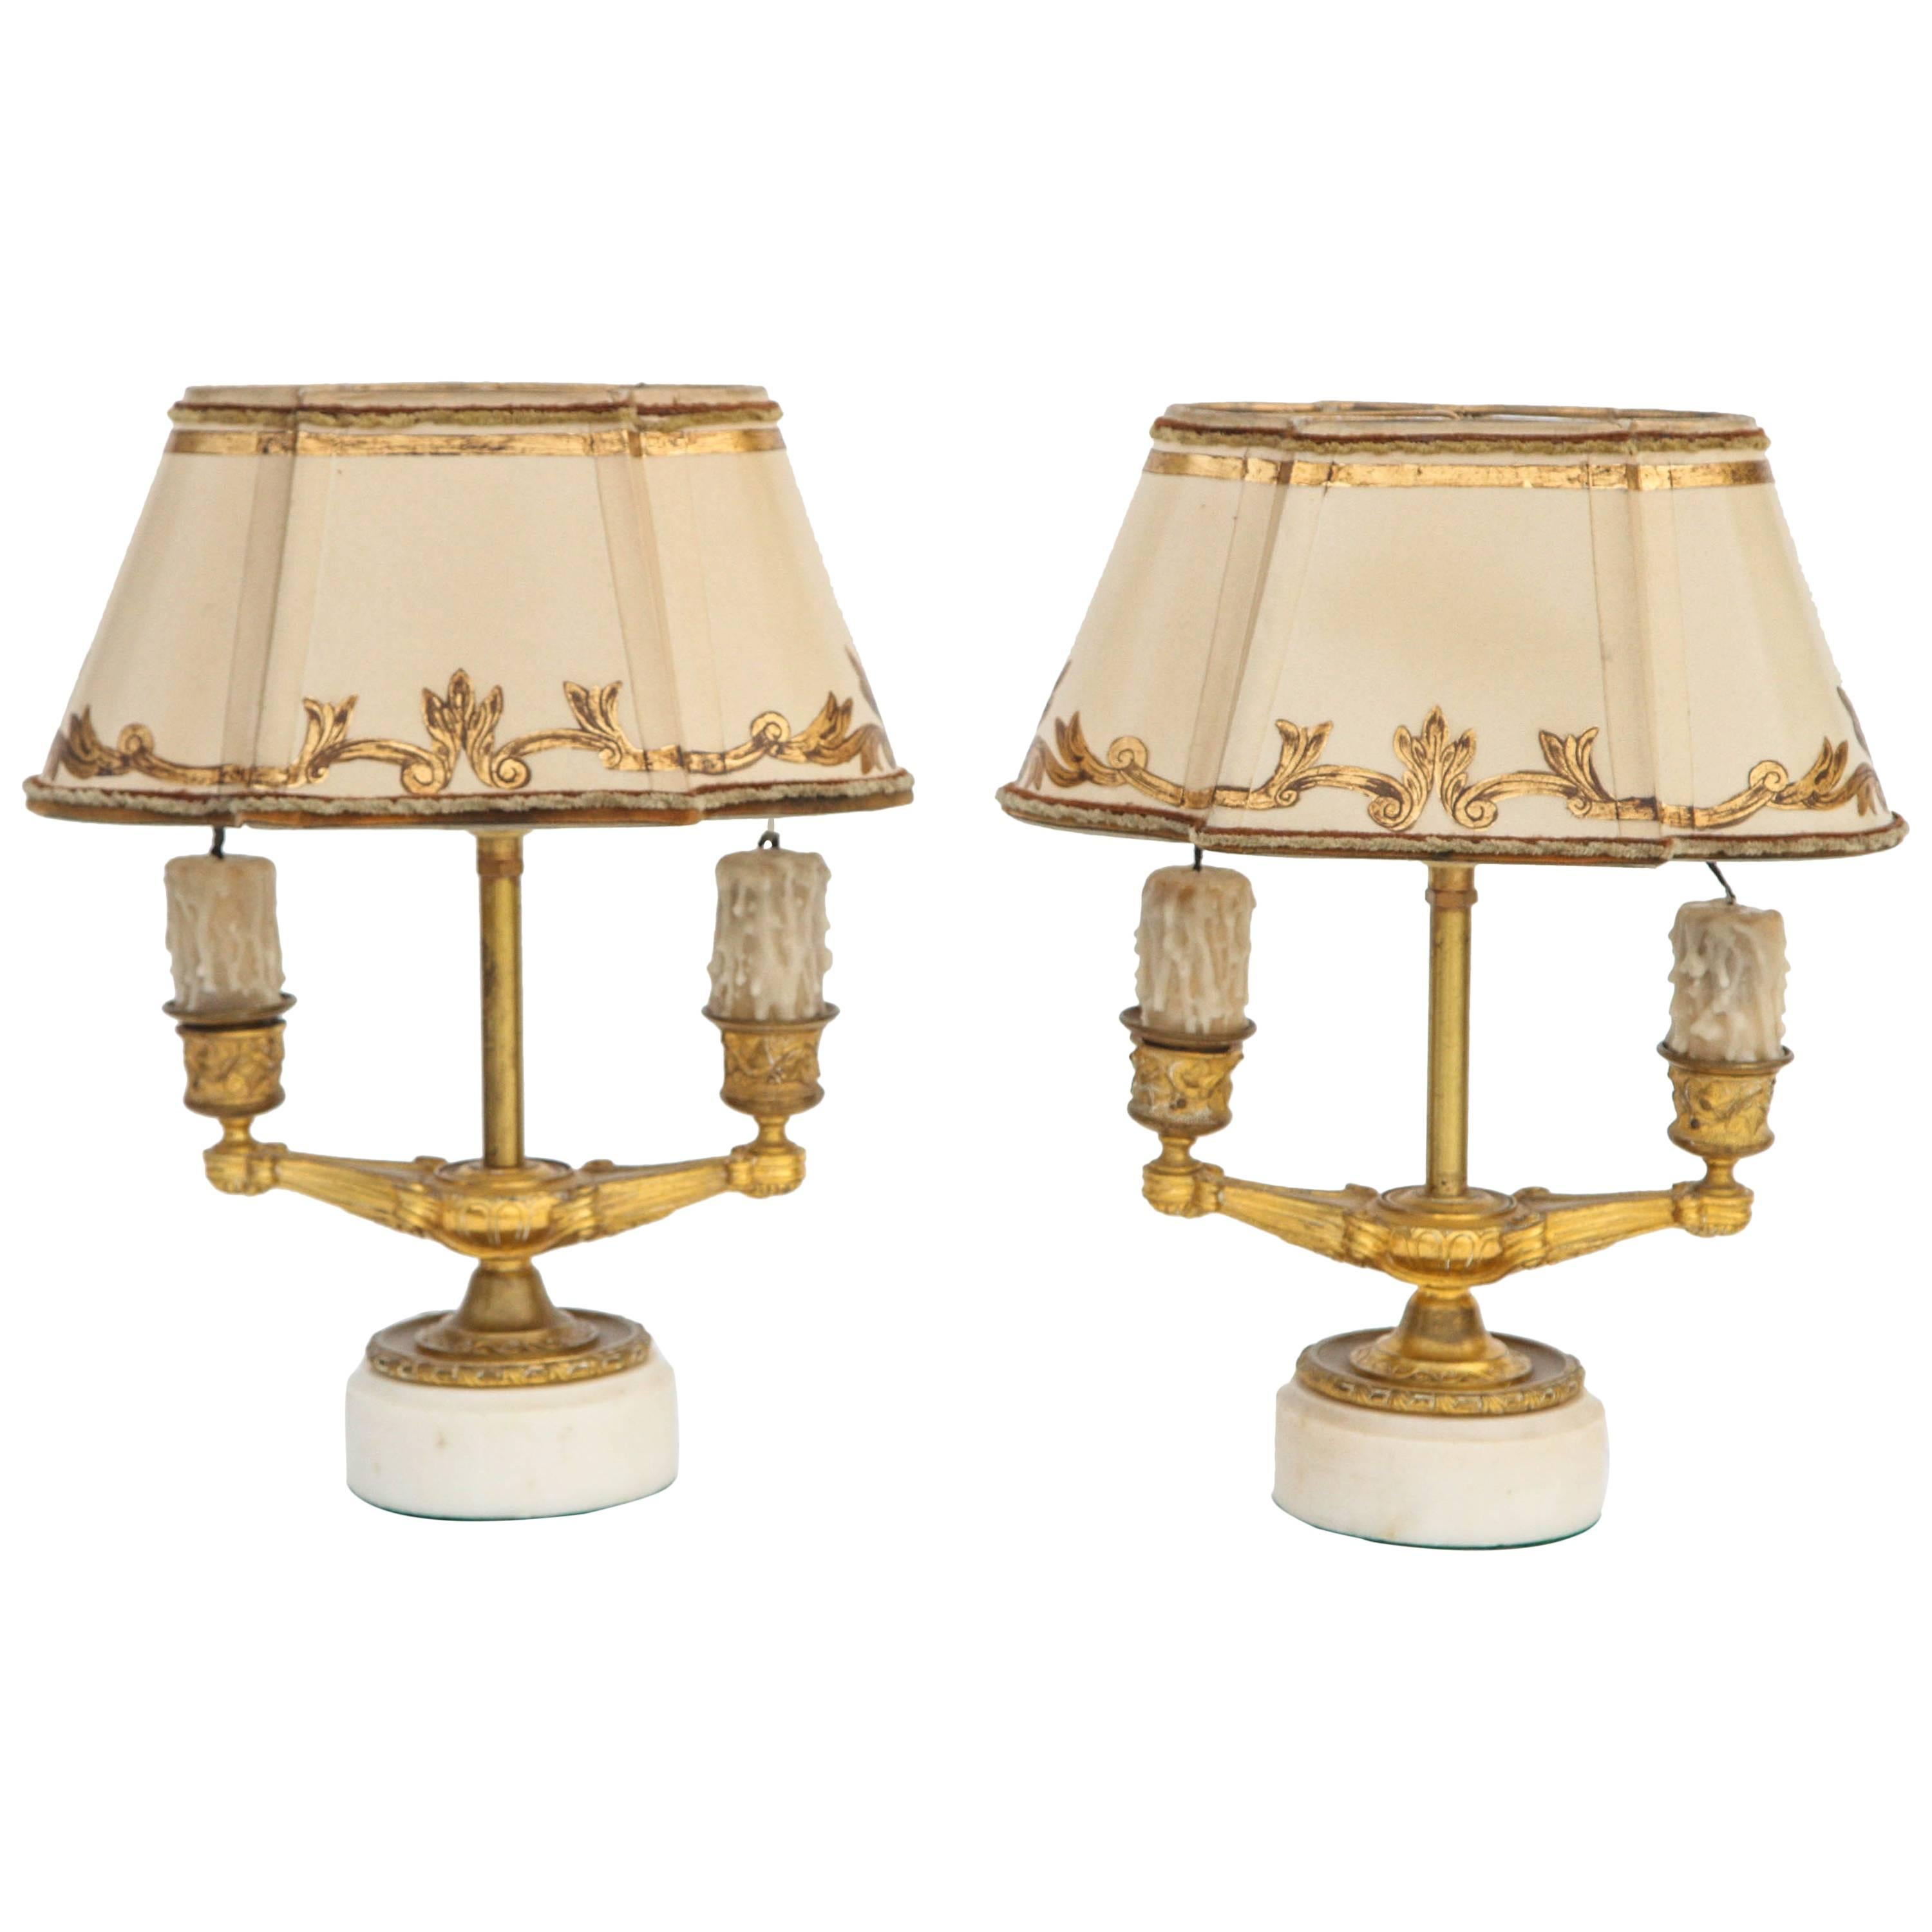 Pair of 19th Century French Doré Bronze Candle Lamps